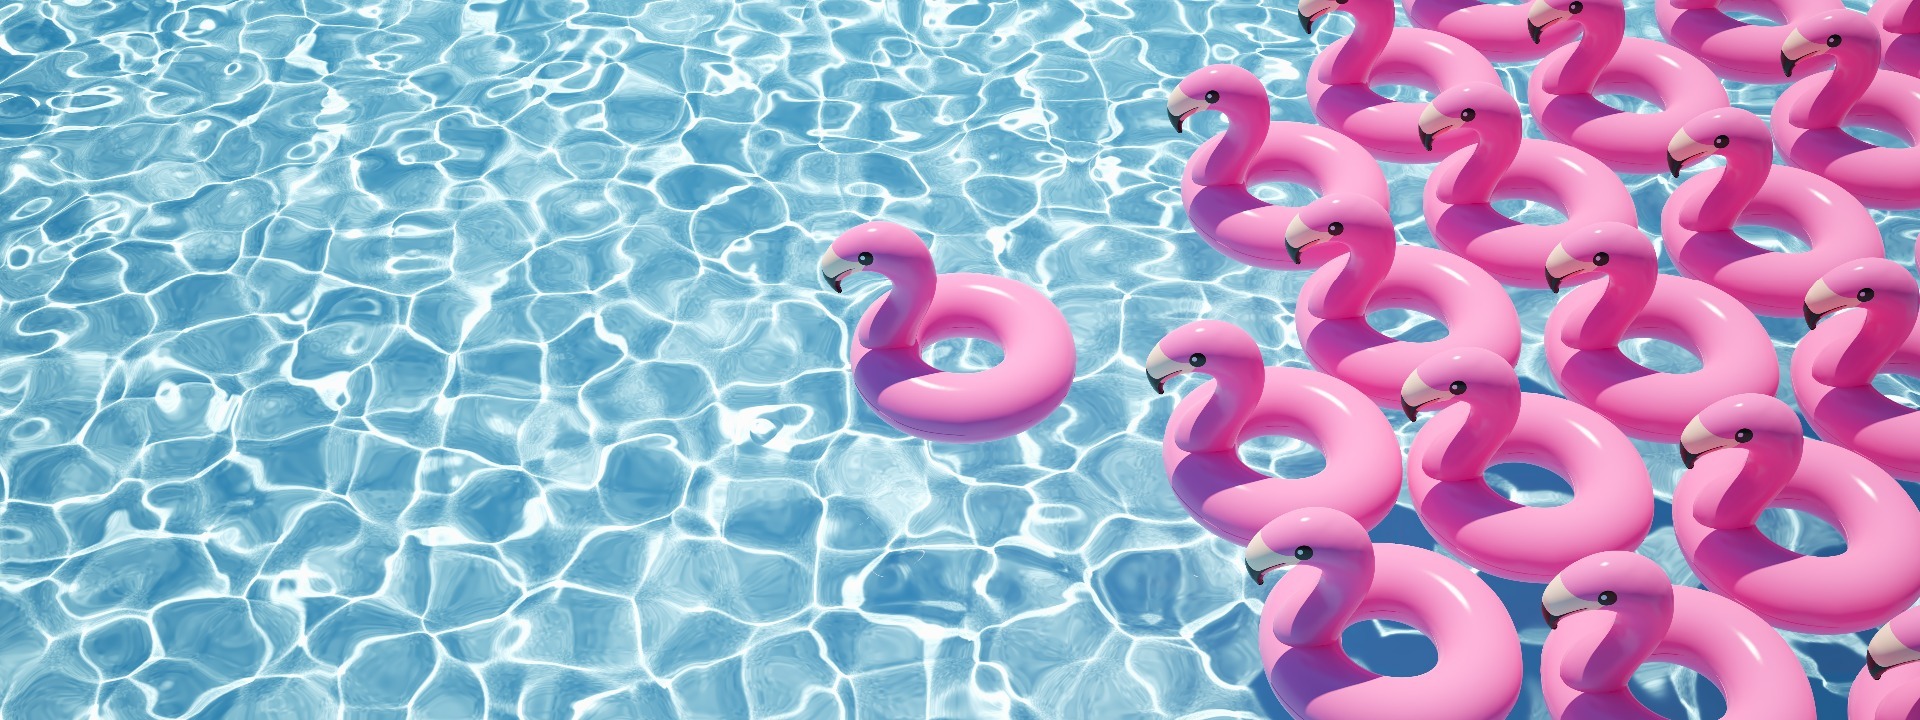 A clear, blue pool with pink, flamingo floats